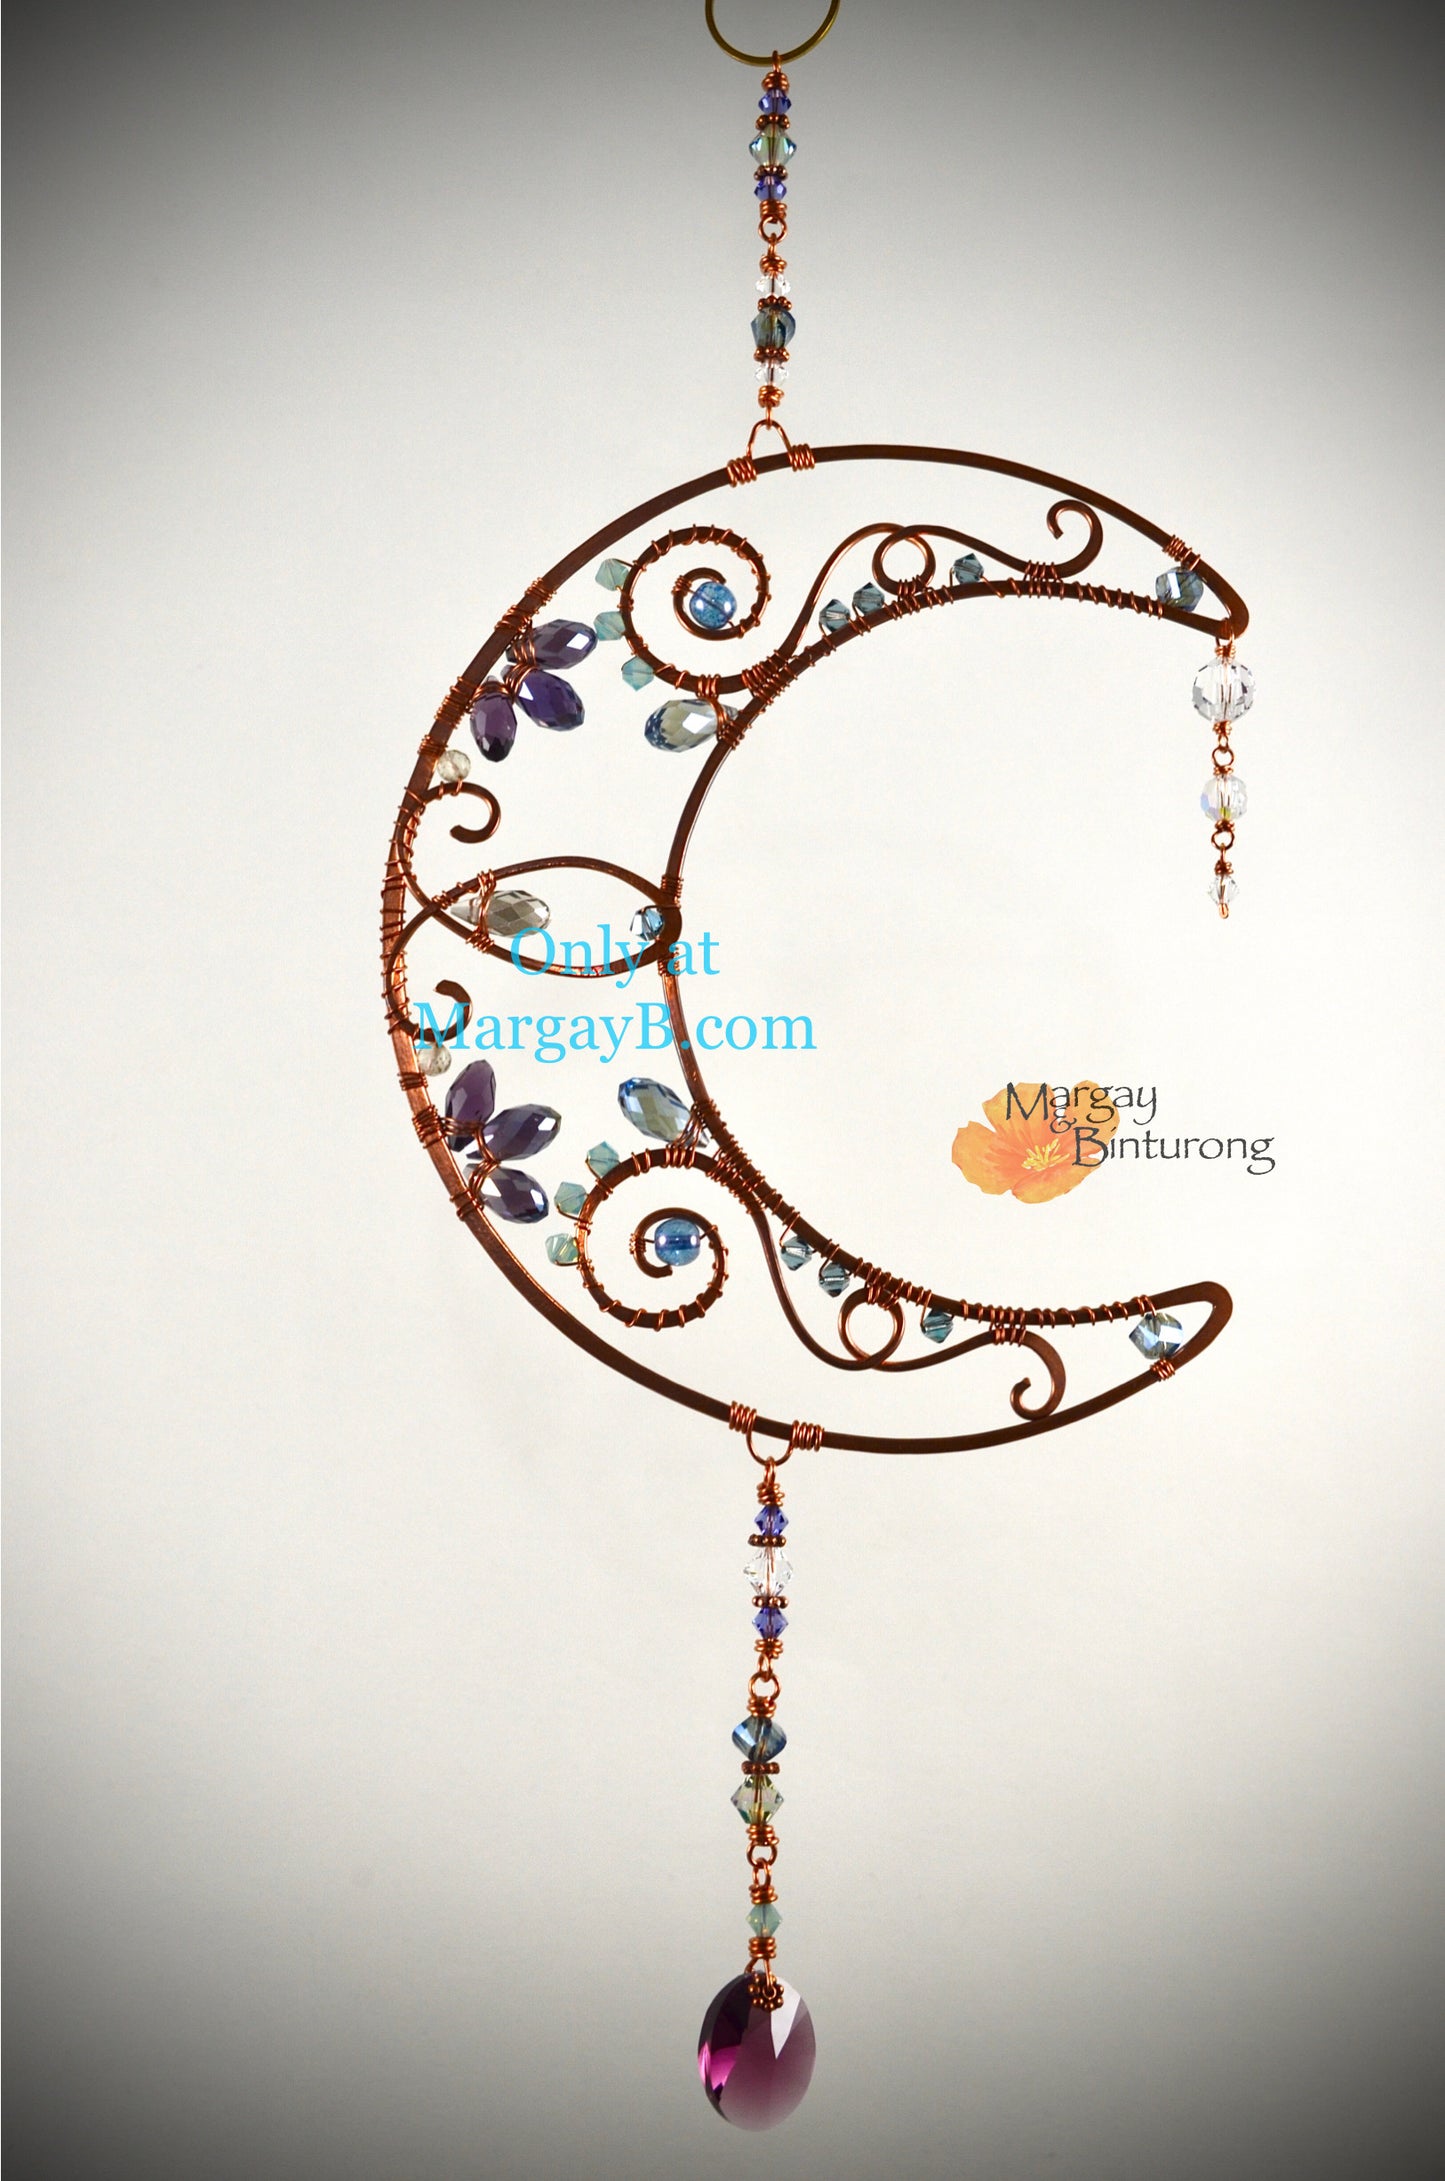 Crescent Moon Suncatcher Handmade with Wire Wrapped Crystal prism rainbow makers